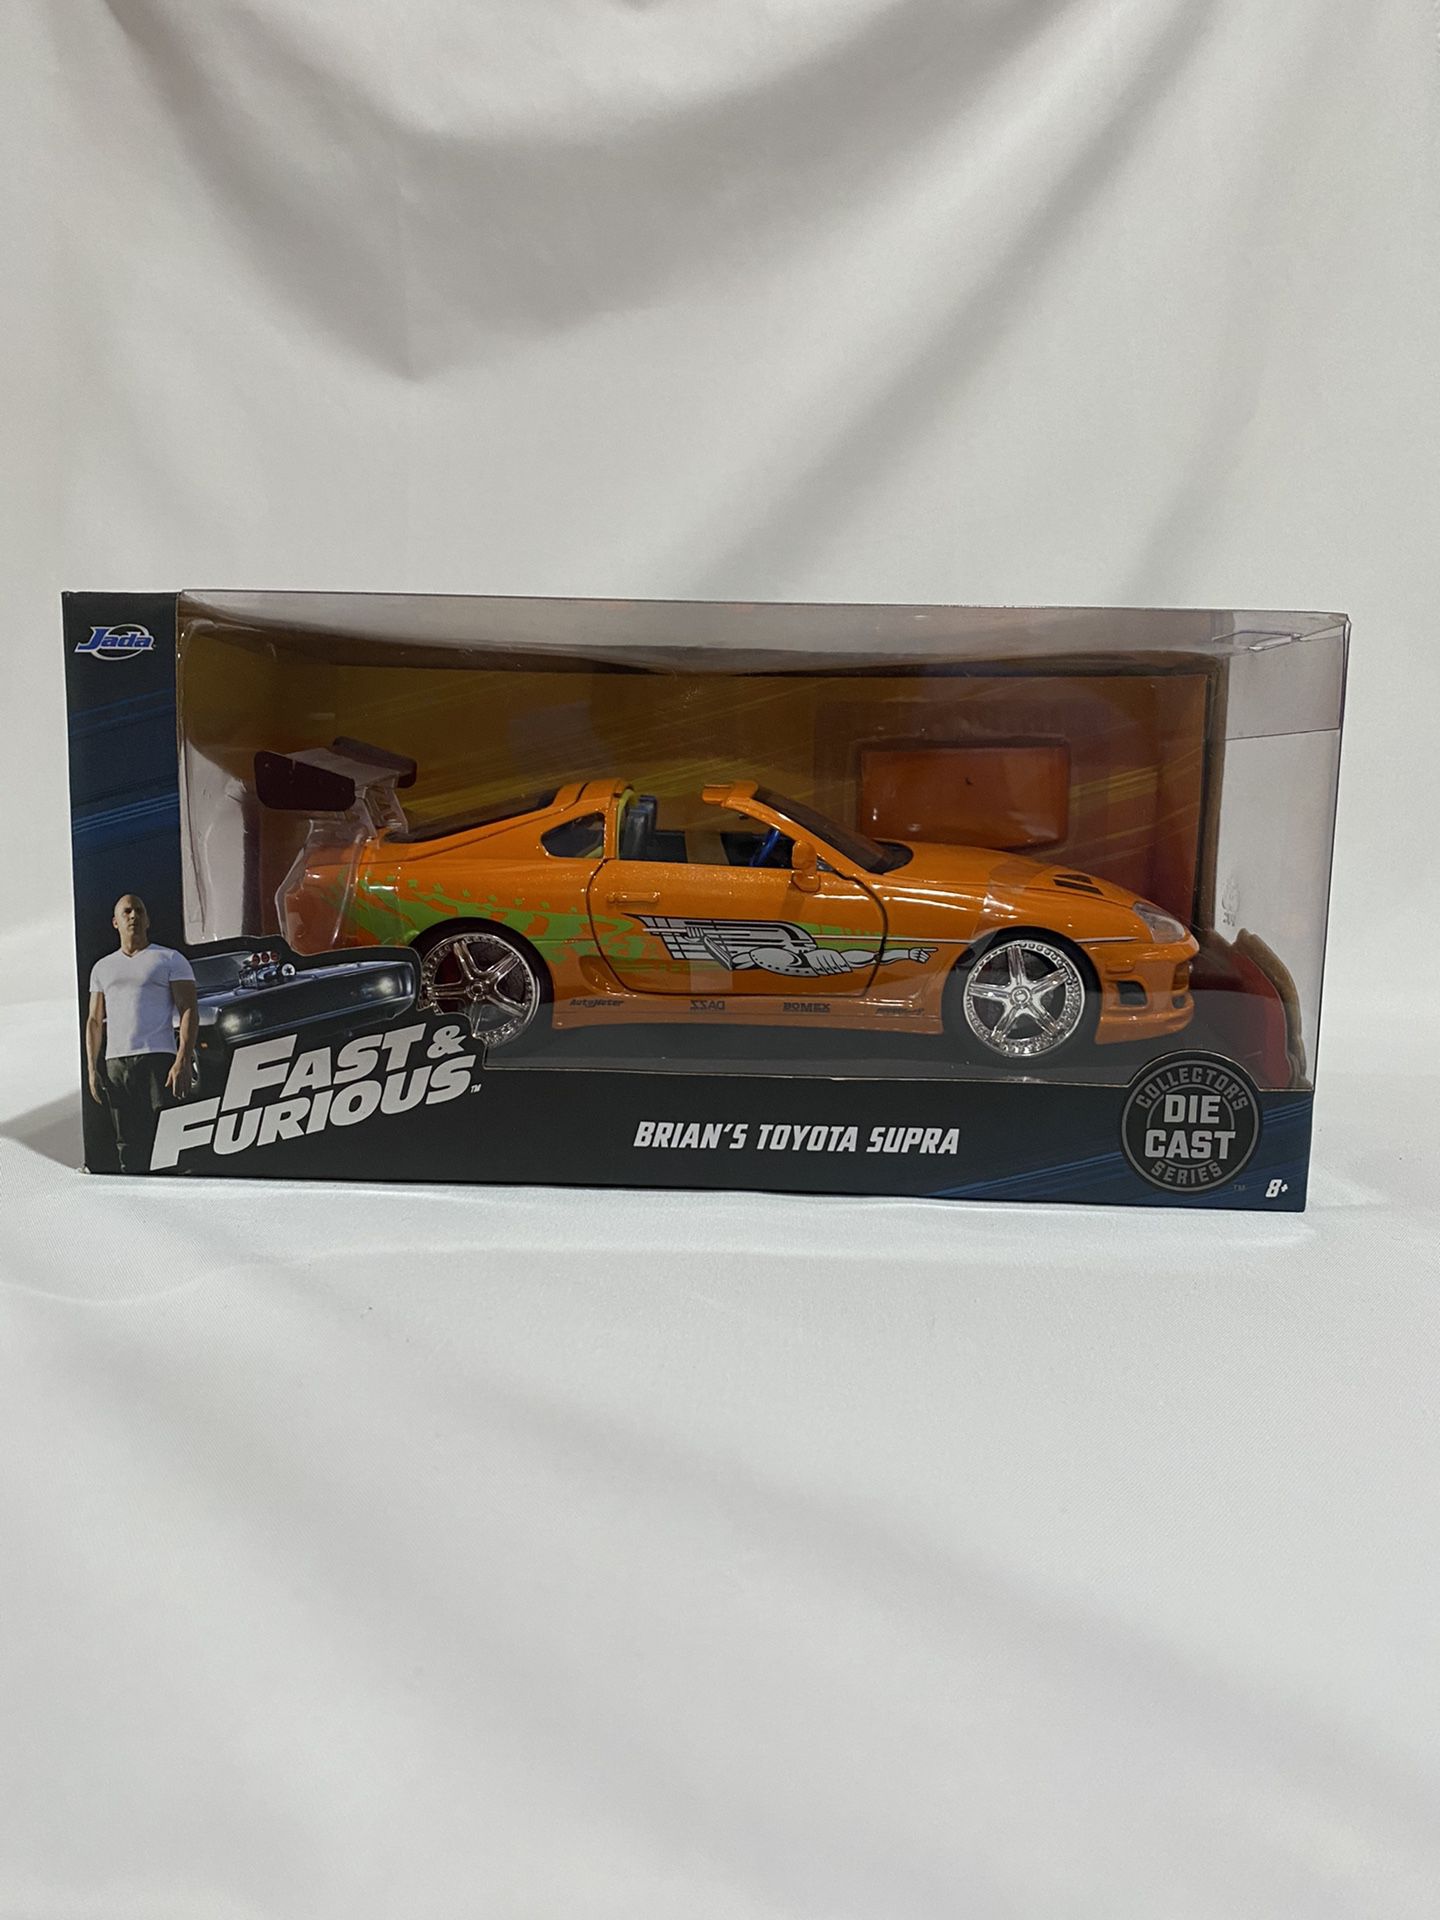 Fast and Furious Toyota Supra Collectible Car Toy